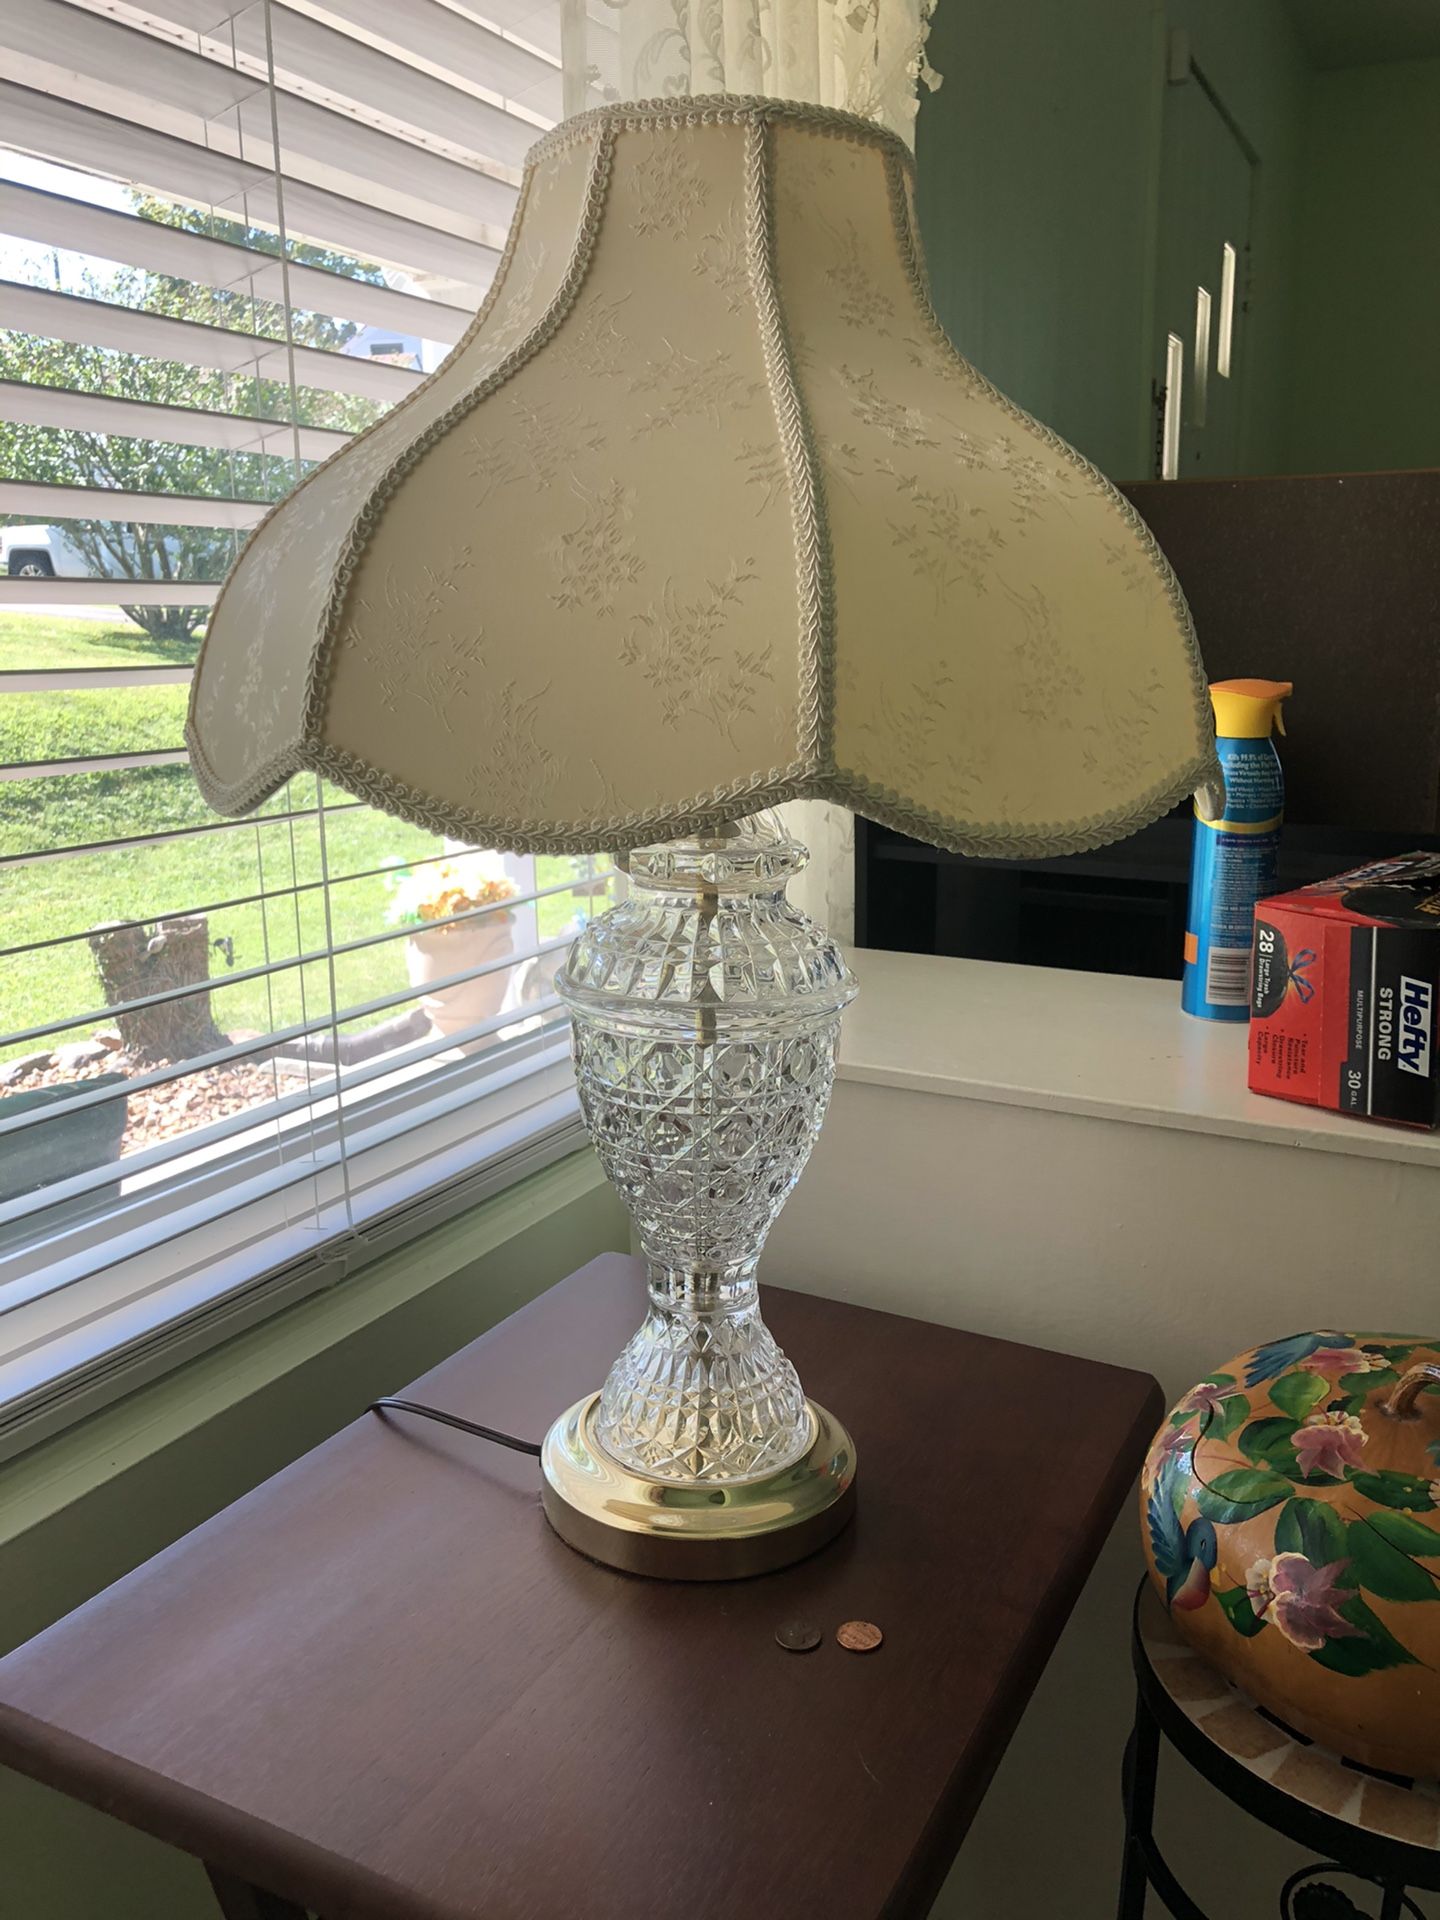 2 glass lamps with shades